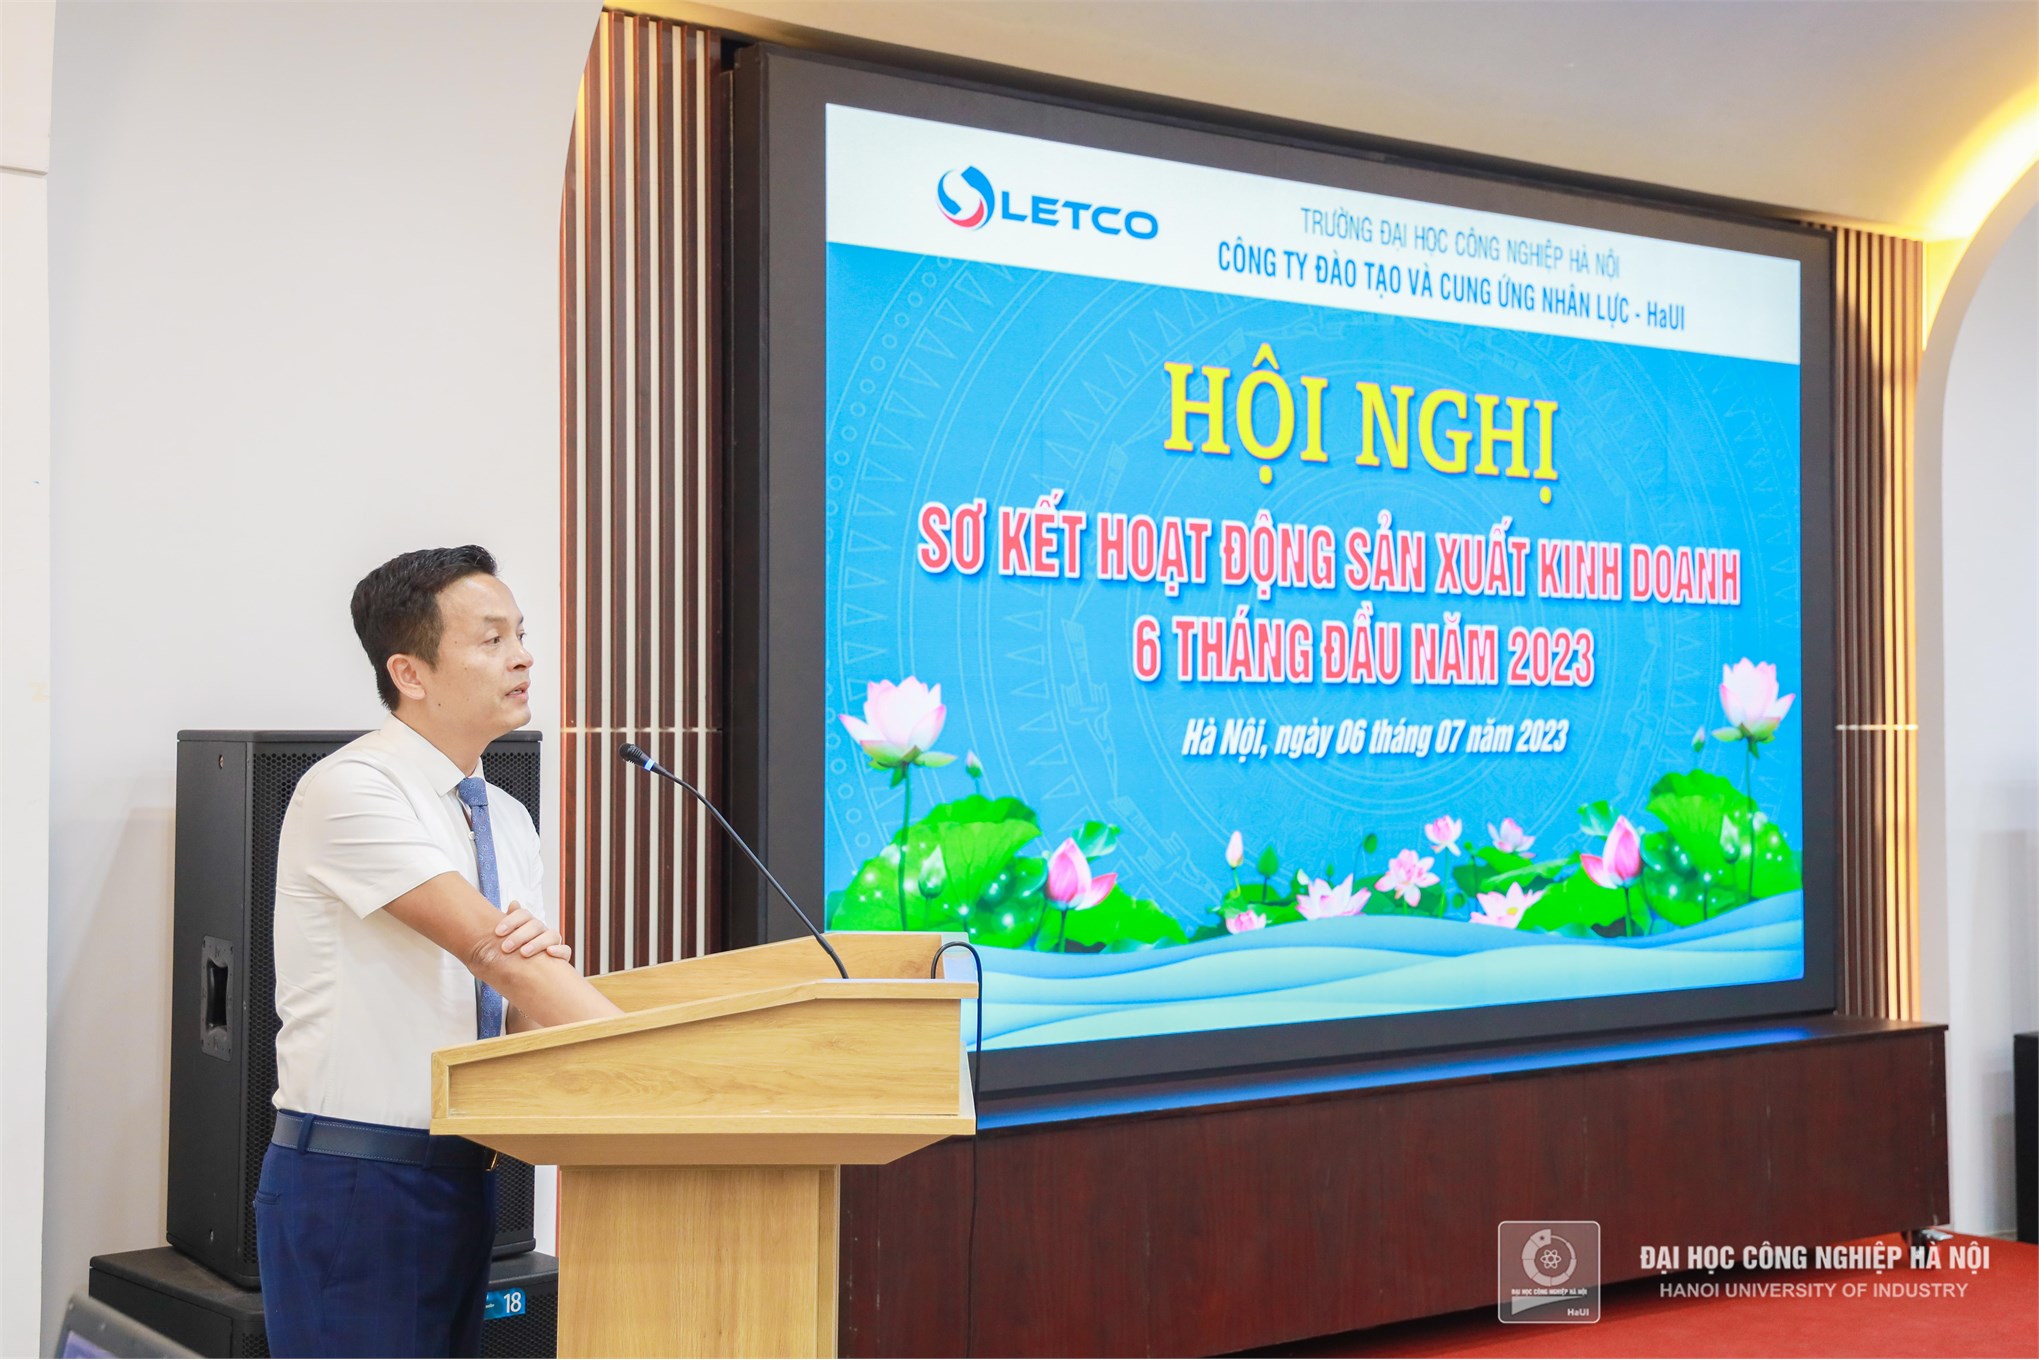 Mr. Nguyen Quang Trung, Director of LETCO Company reported a summary of the business activities statistics for the first six months of 2023